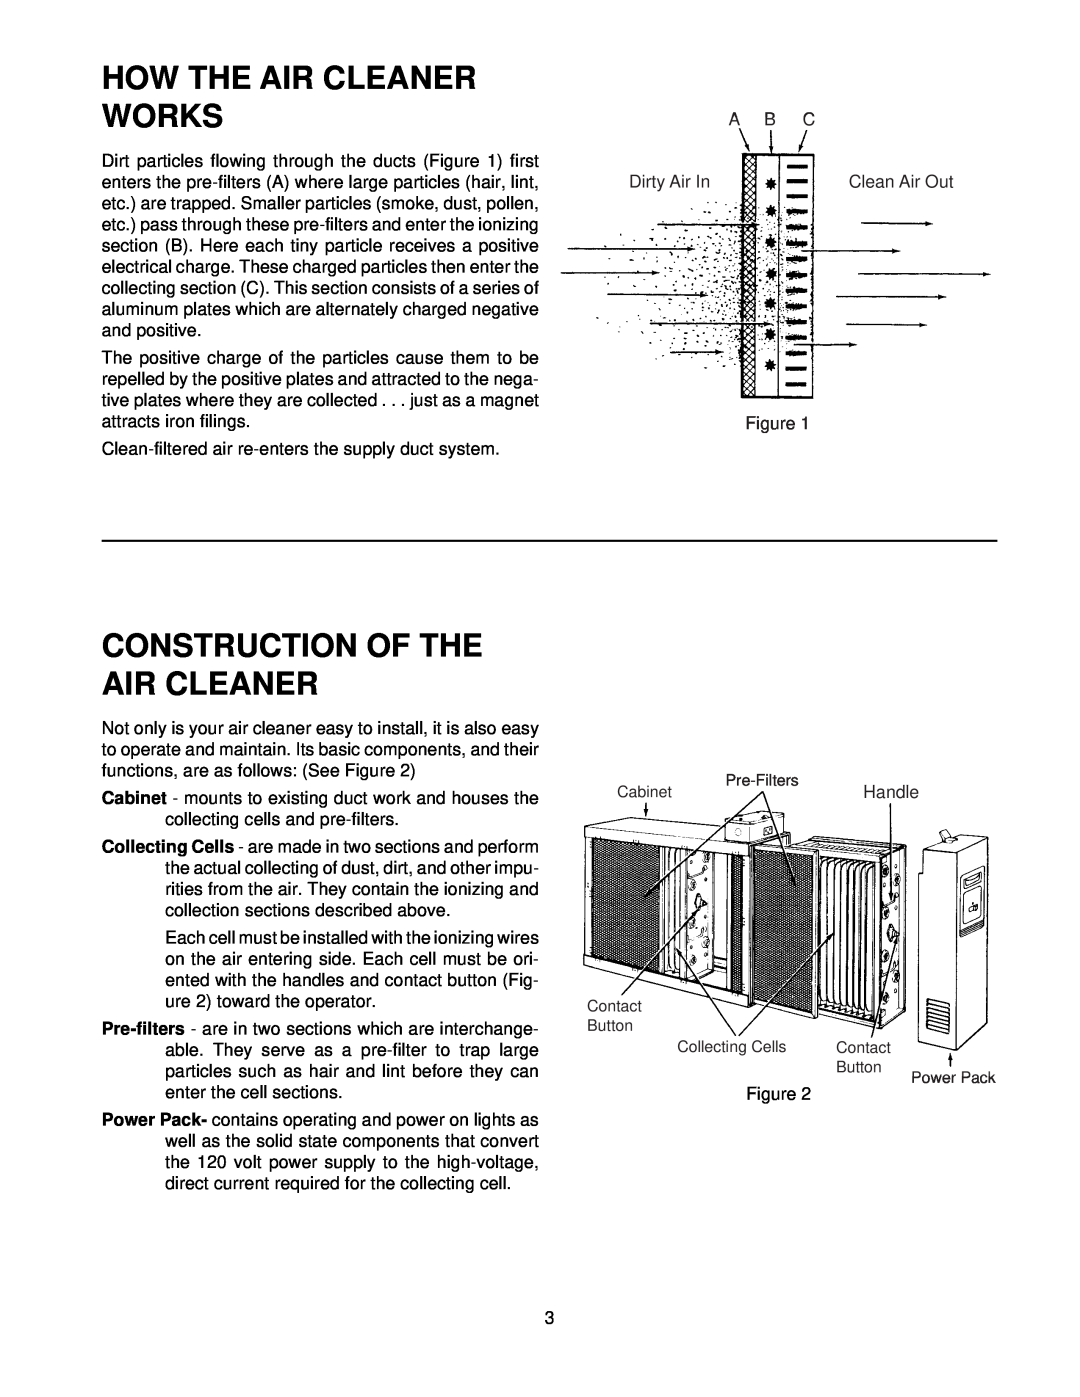 Emerson 16C26S-010 owner manual How The Air Cleaner Works, Construction Of The Air Cleaner 